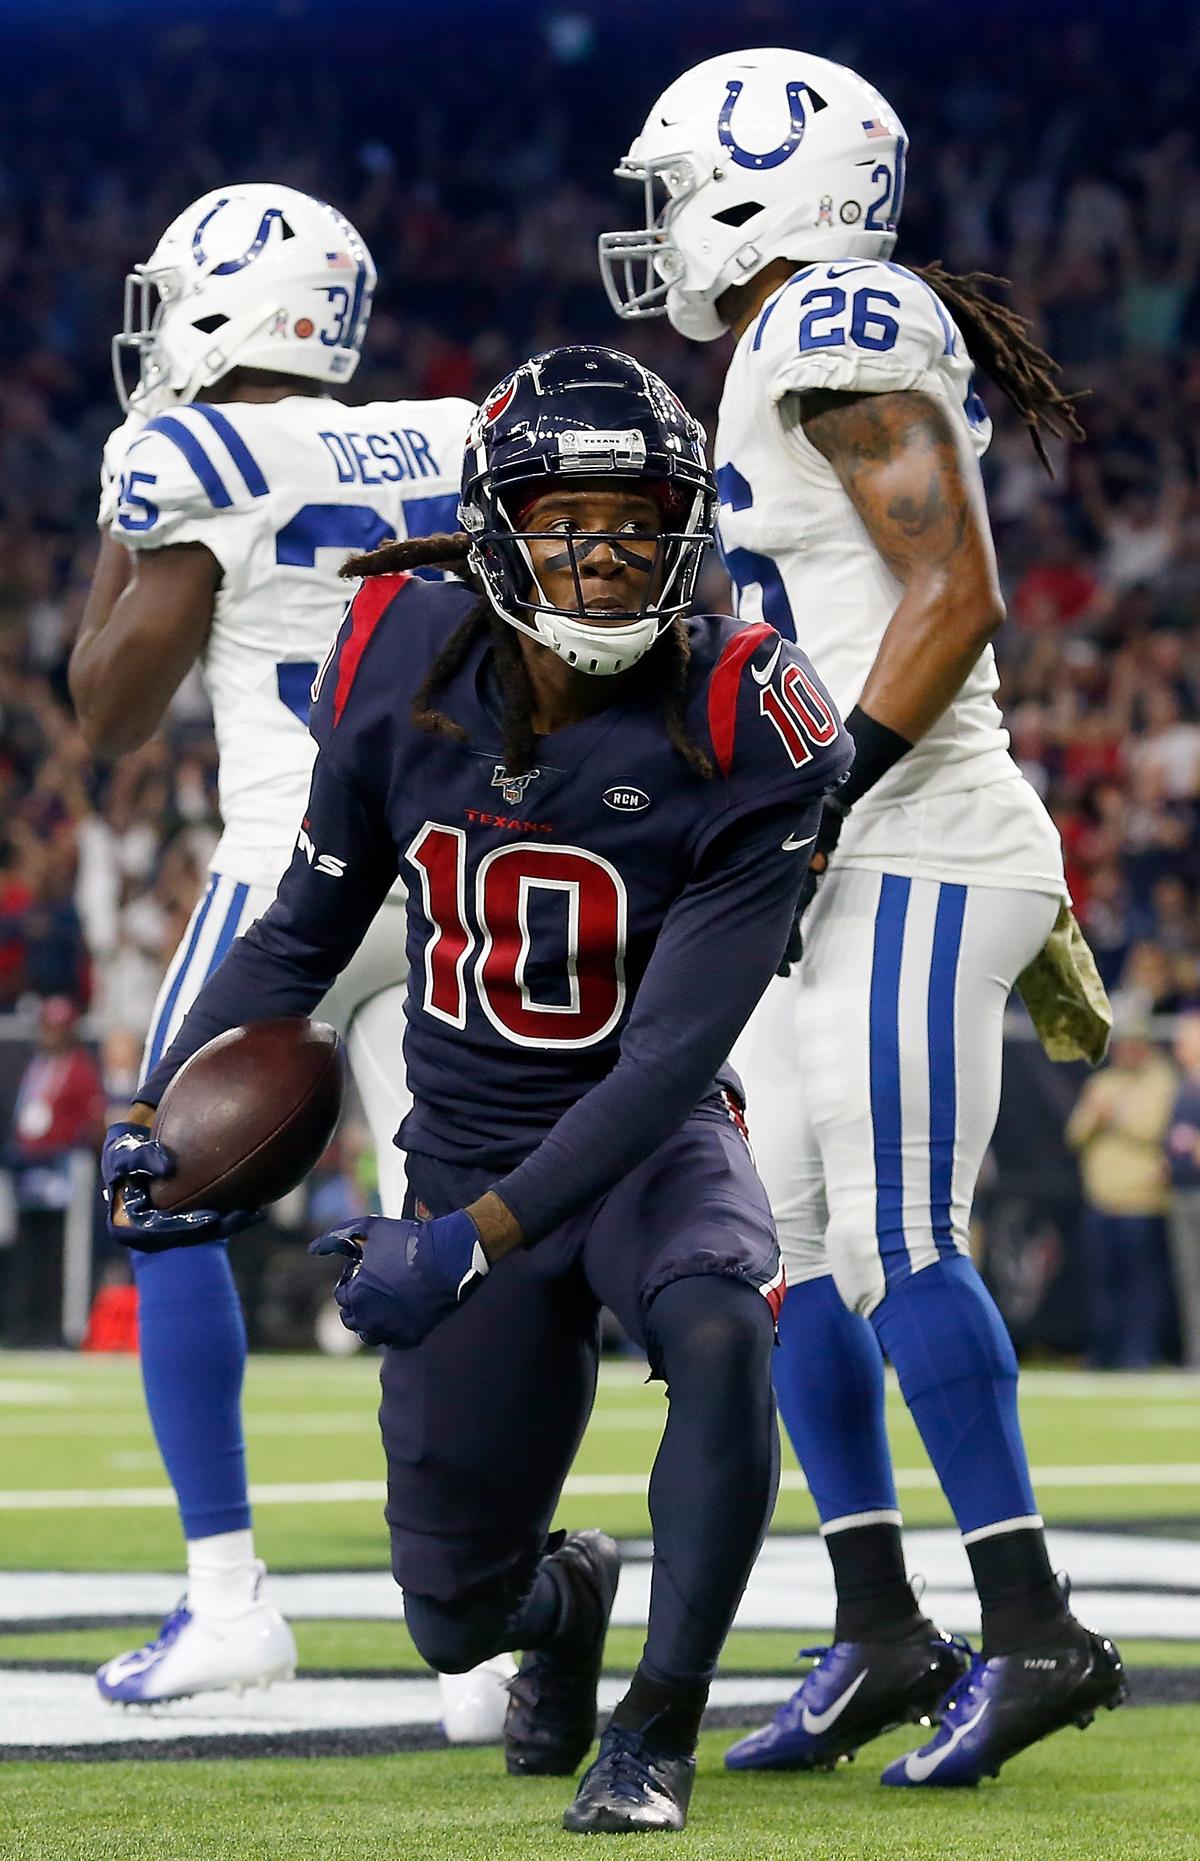 Hopkins catches a pass for a touchdown in the second quarter on Nov. 21, 2019. (©Getty Images | <a href="https://www.gettyimages.com/detail/news-photo/wide-receiver-deandre-hopkins-of-the-houston-texans-catches-news-photo/1189250708">Tim Warner</a>)